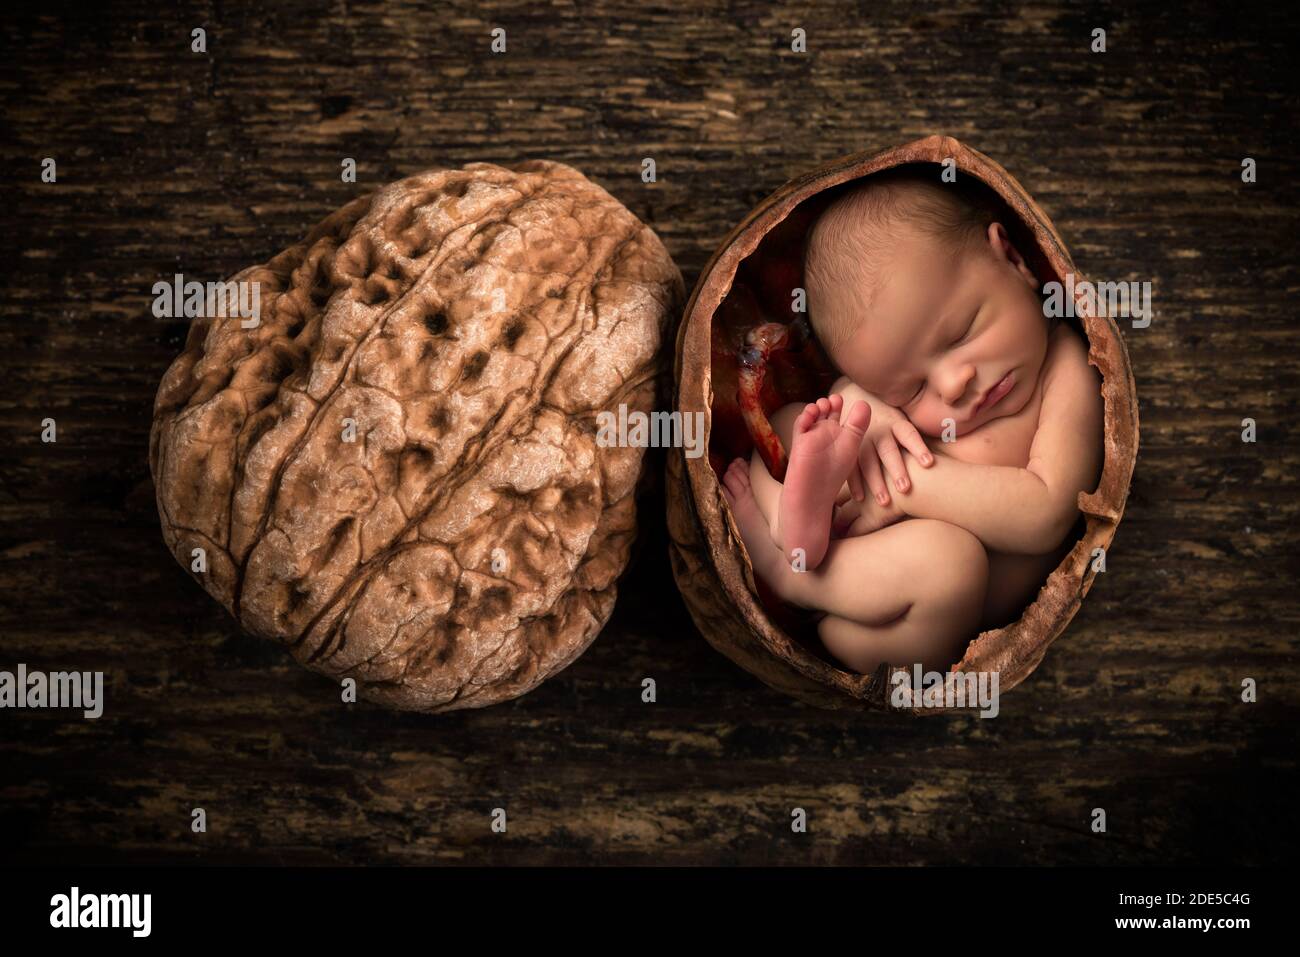 Composite image of a newborn baby curled up as a foetus in an open walnut Stock Photo